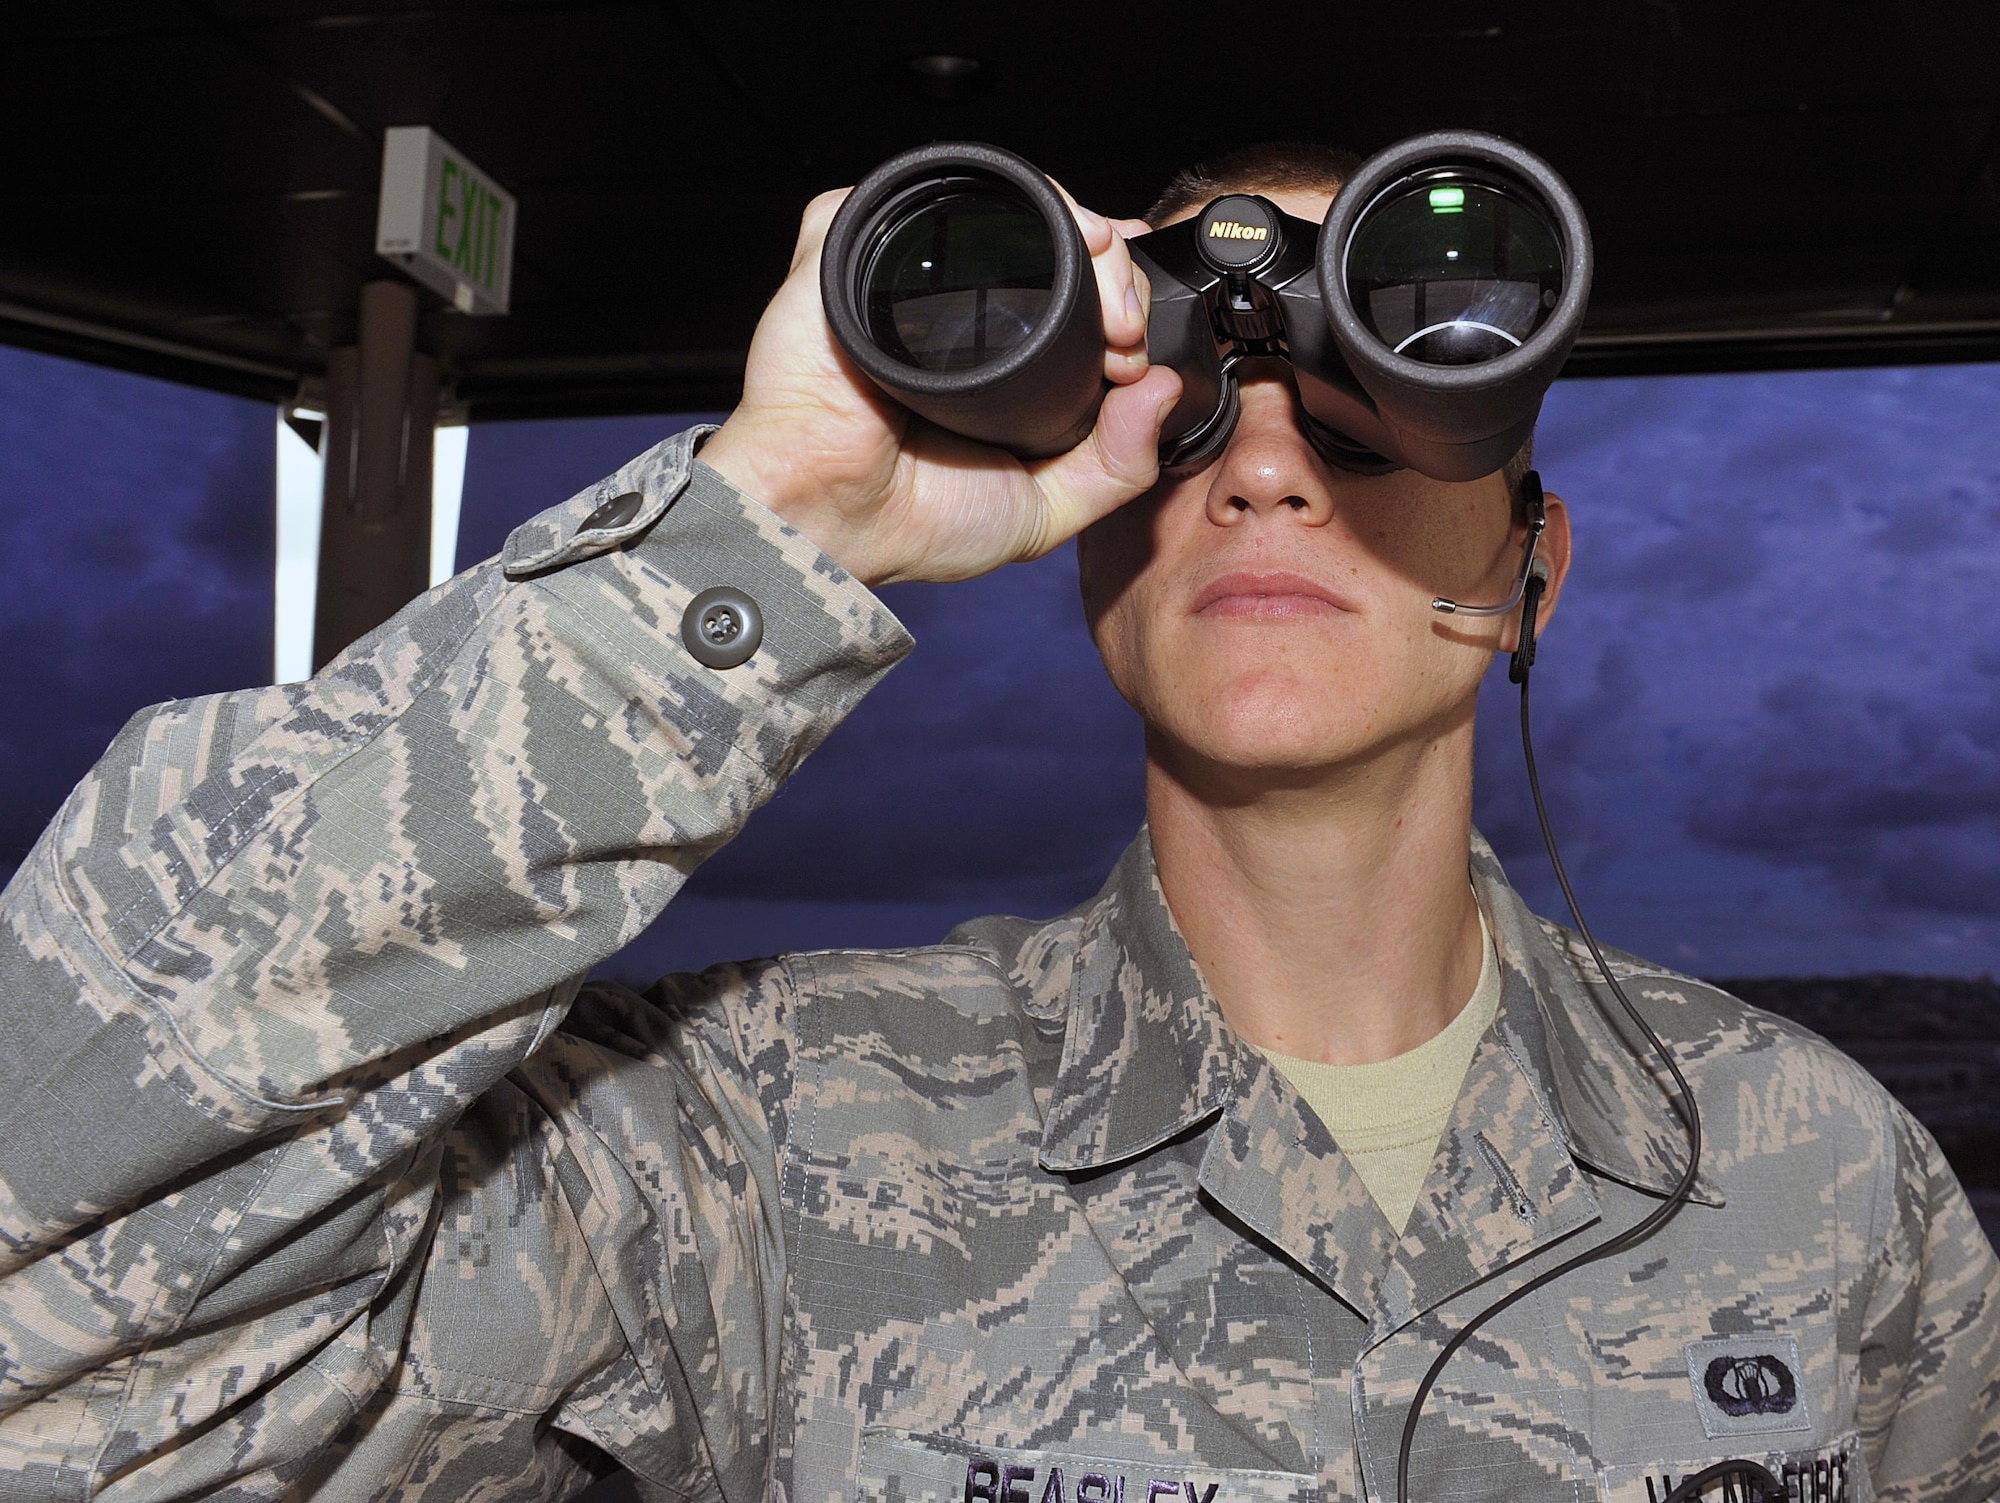 U.S. Air Force Staff Sgt. Dennis Beasley, 18th Operations Support Squadron air traffic controller, monitors an outbound aircraft, Nov. 30, 2015, at Kadena Air Base, Japan. The ATC tower provides air traffic controllers the best view to ensure aircraft arrive and depart safely. (U.S. Air Force photo by Naoto Anazawa/Released)